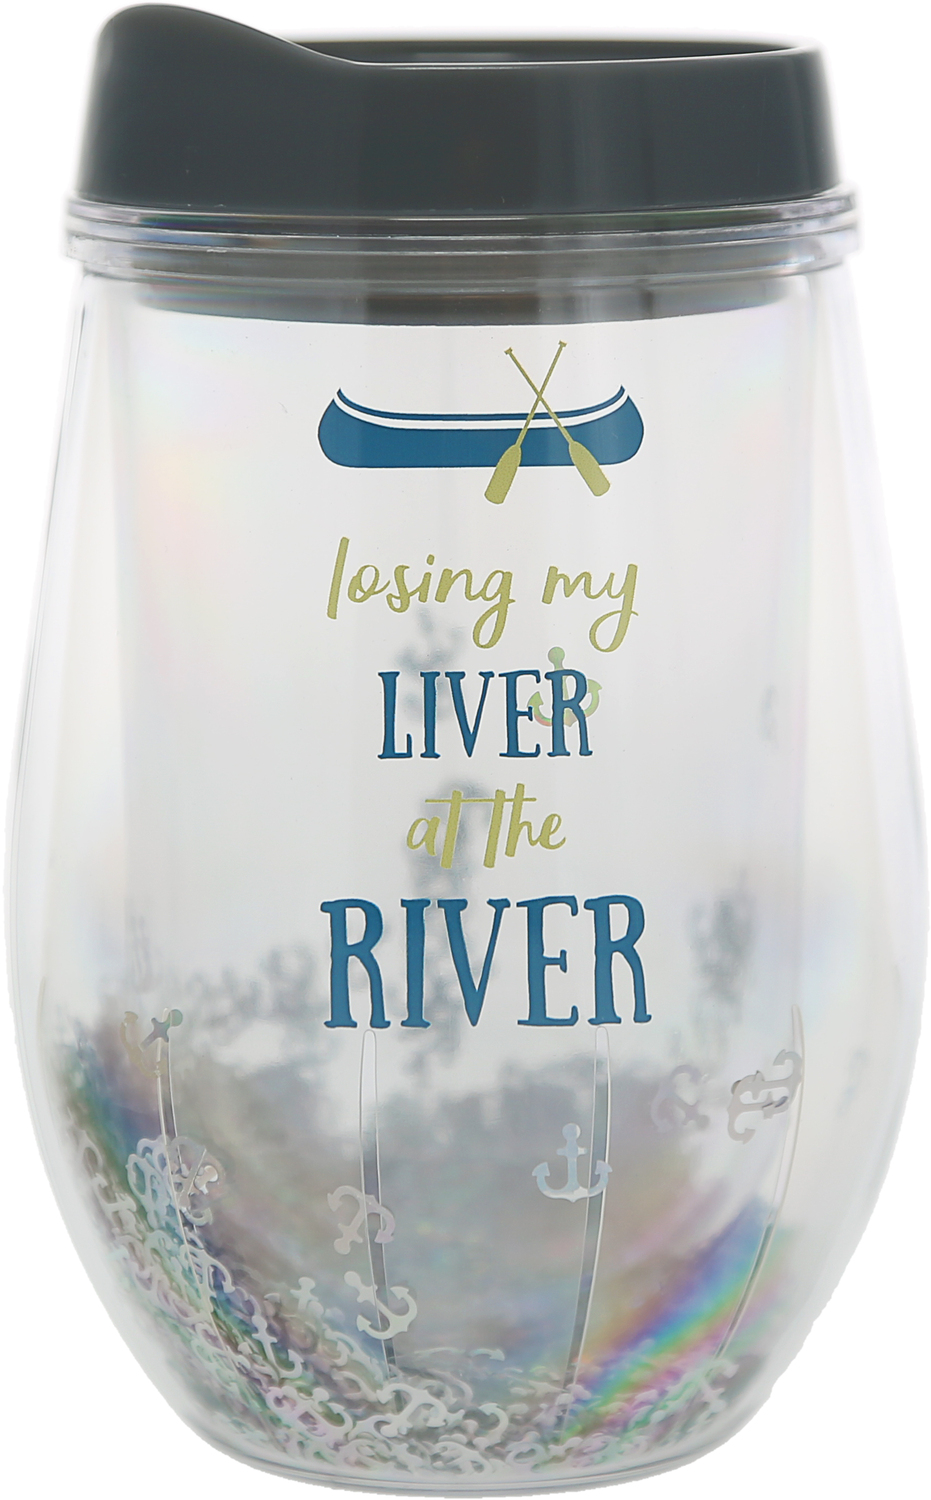 At the River by We People - At the River - 12 oz Acrylic Stemless Wine Glass with Lid